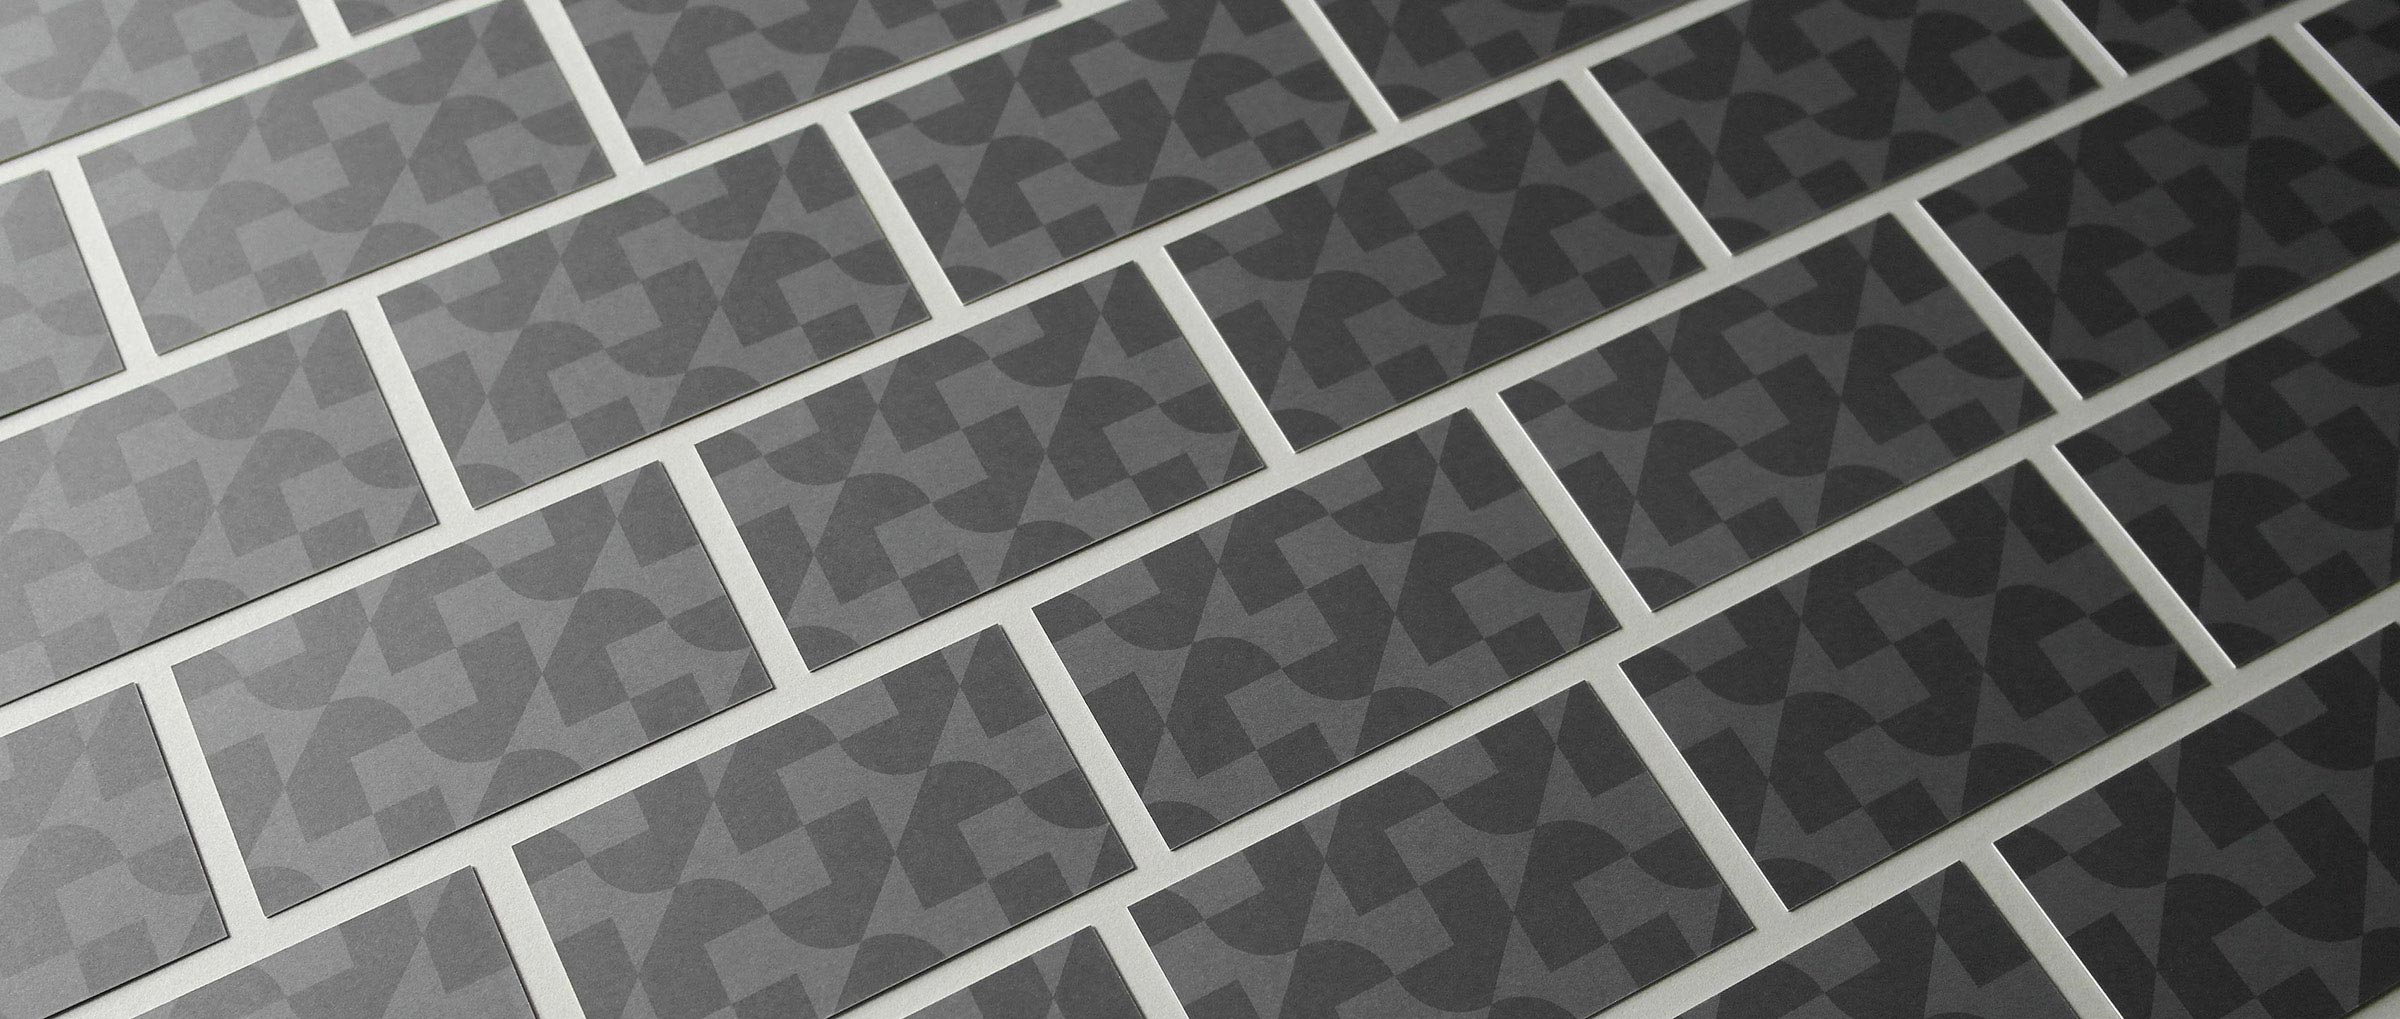 J+R Group business cards in a grid